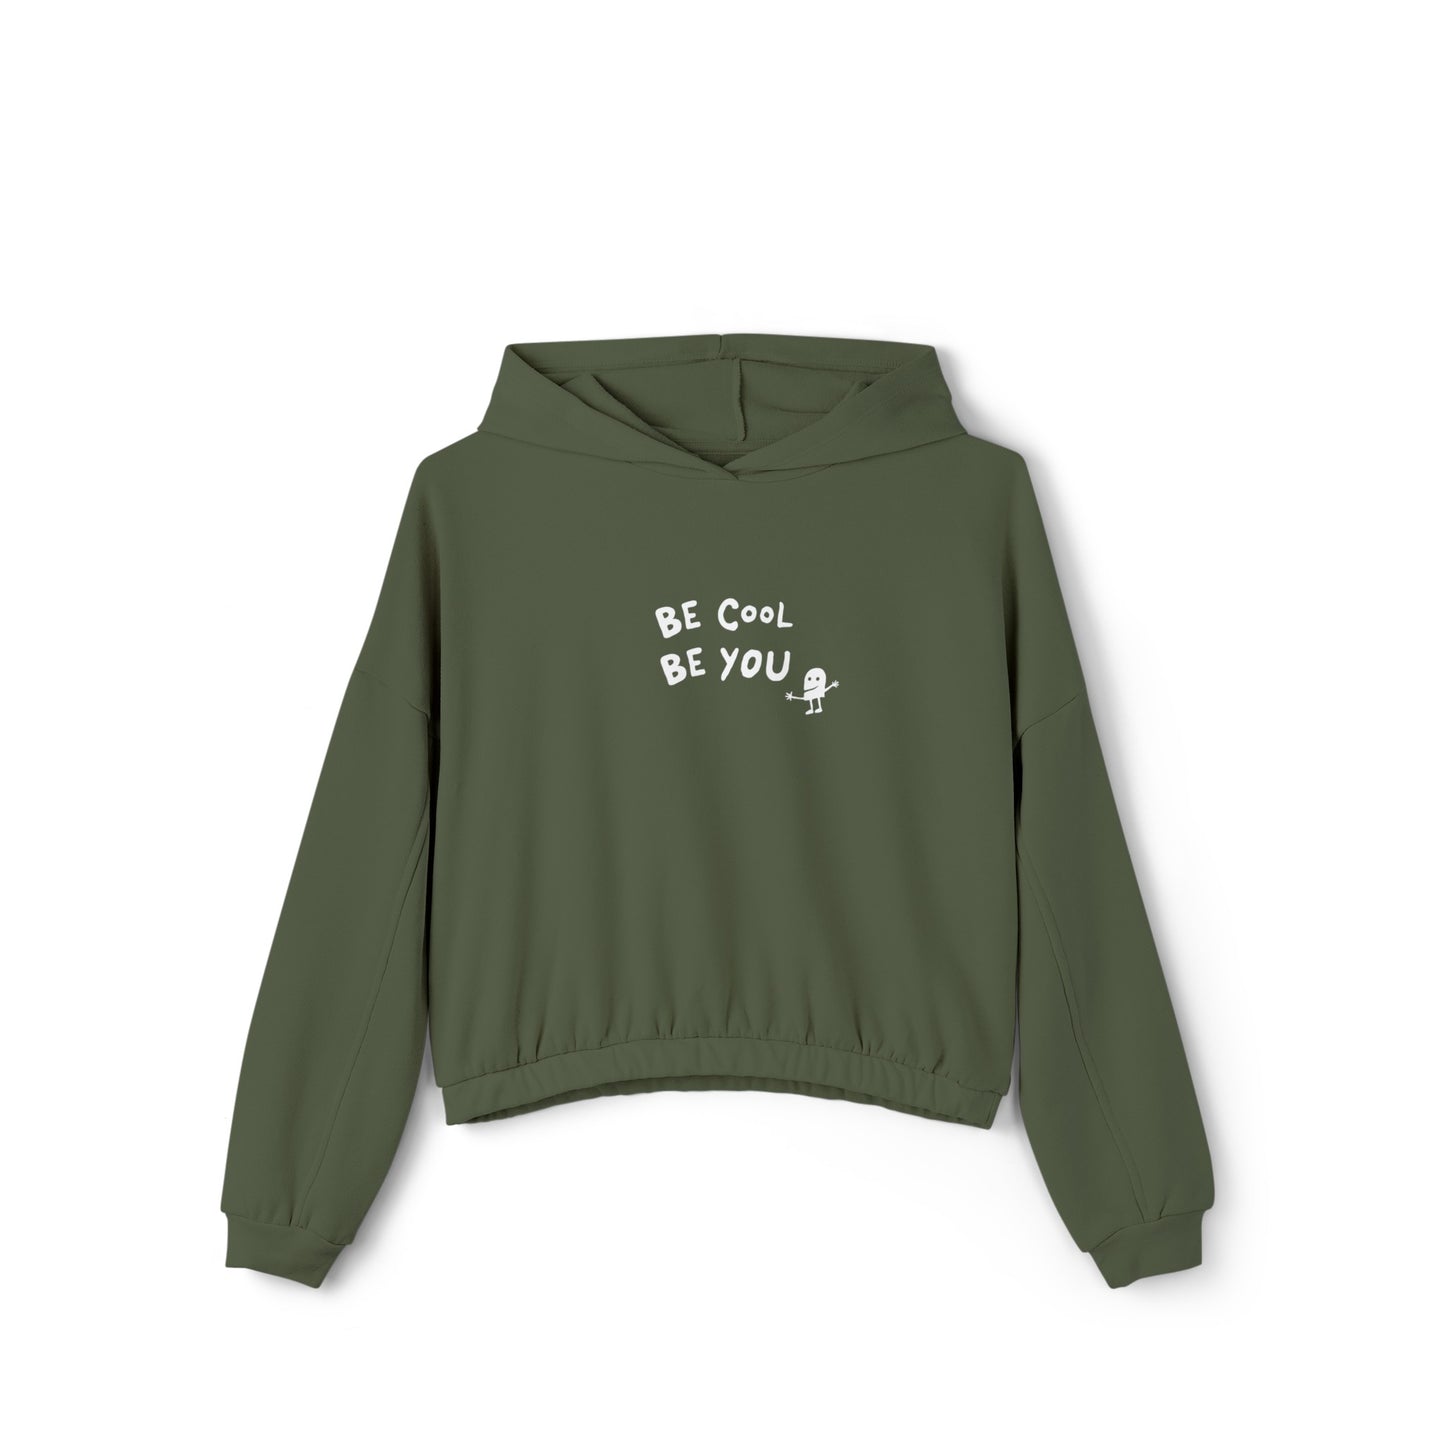 Be Cool Be You Cinched Bottom Women's Hoodie